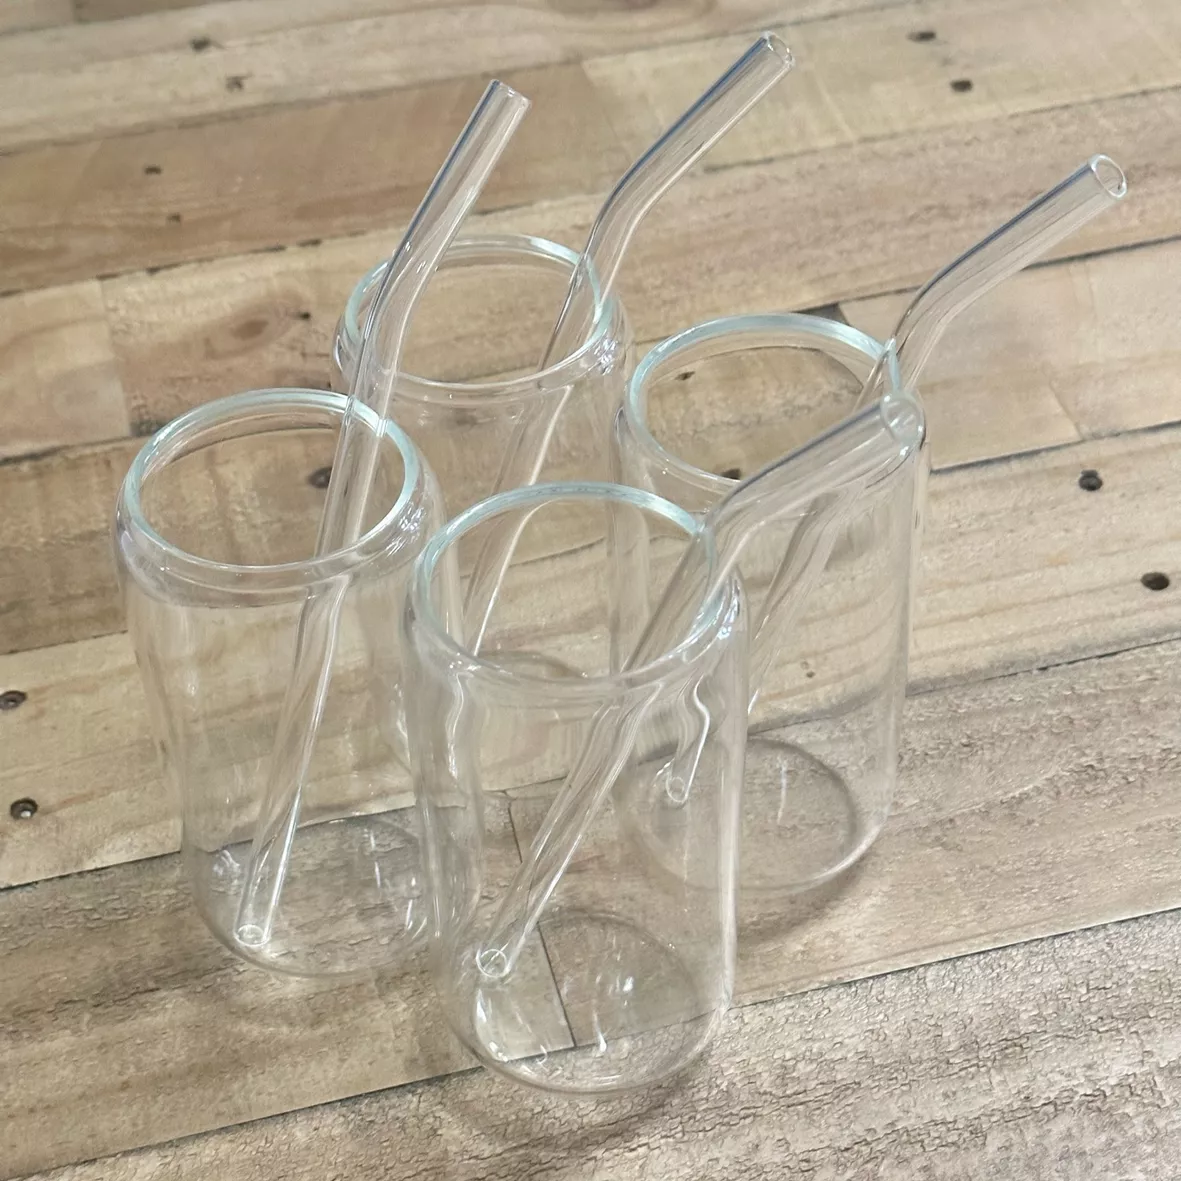 NETANY Can Shaped Glasses with Glass Straws, 4-PC Set, 16 oz